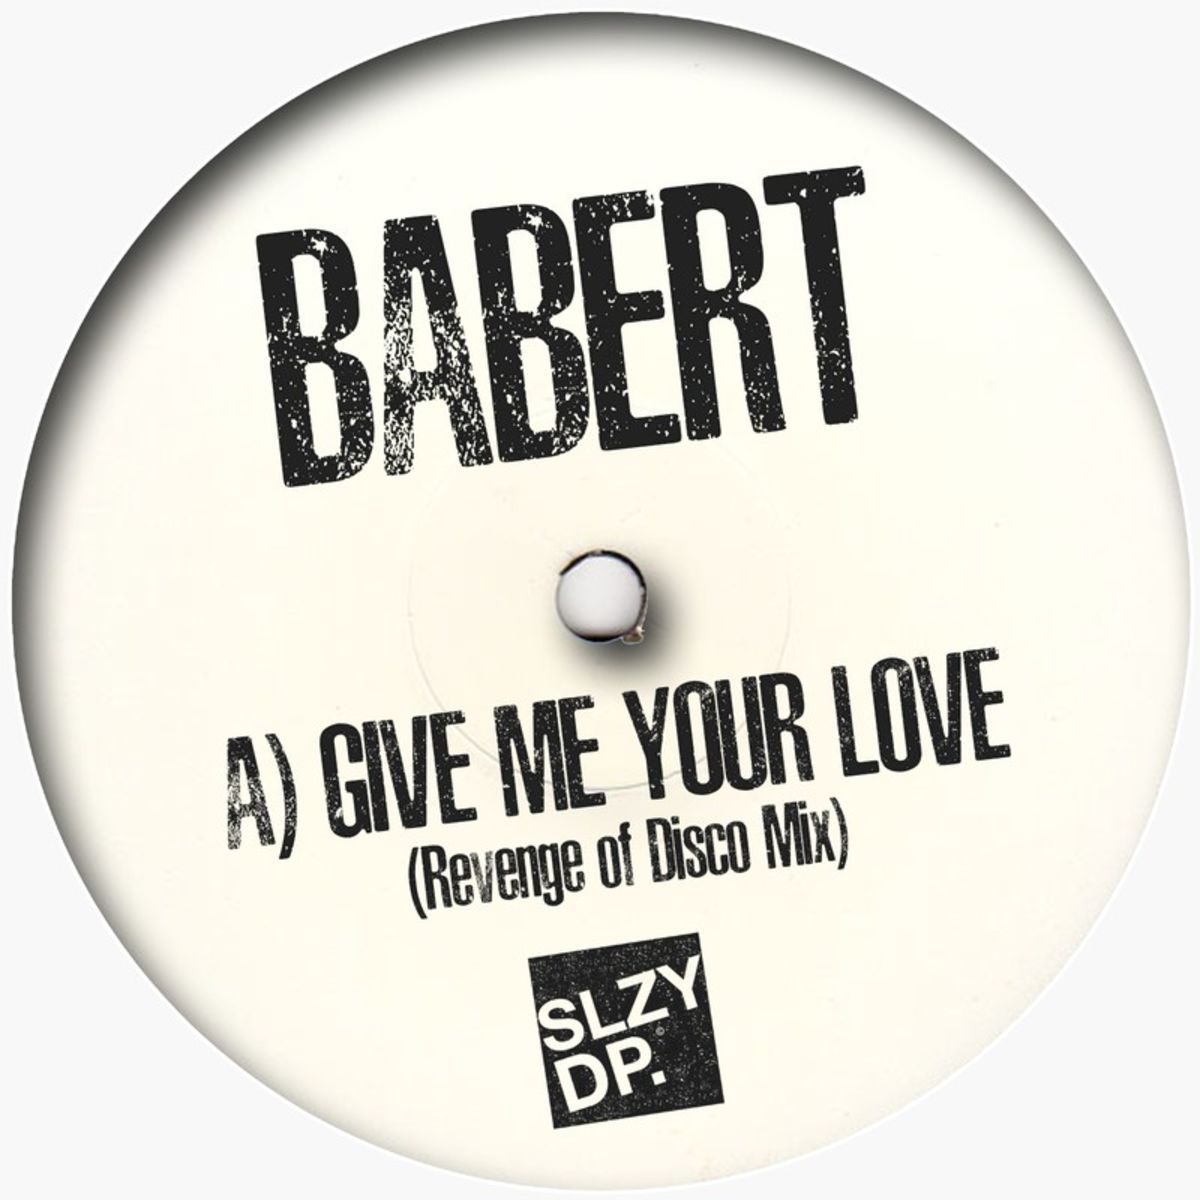 Babert - Give Me Your Love / Sleazy Deep